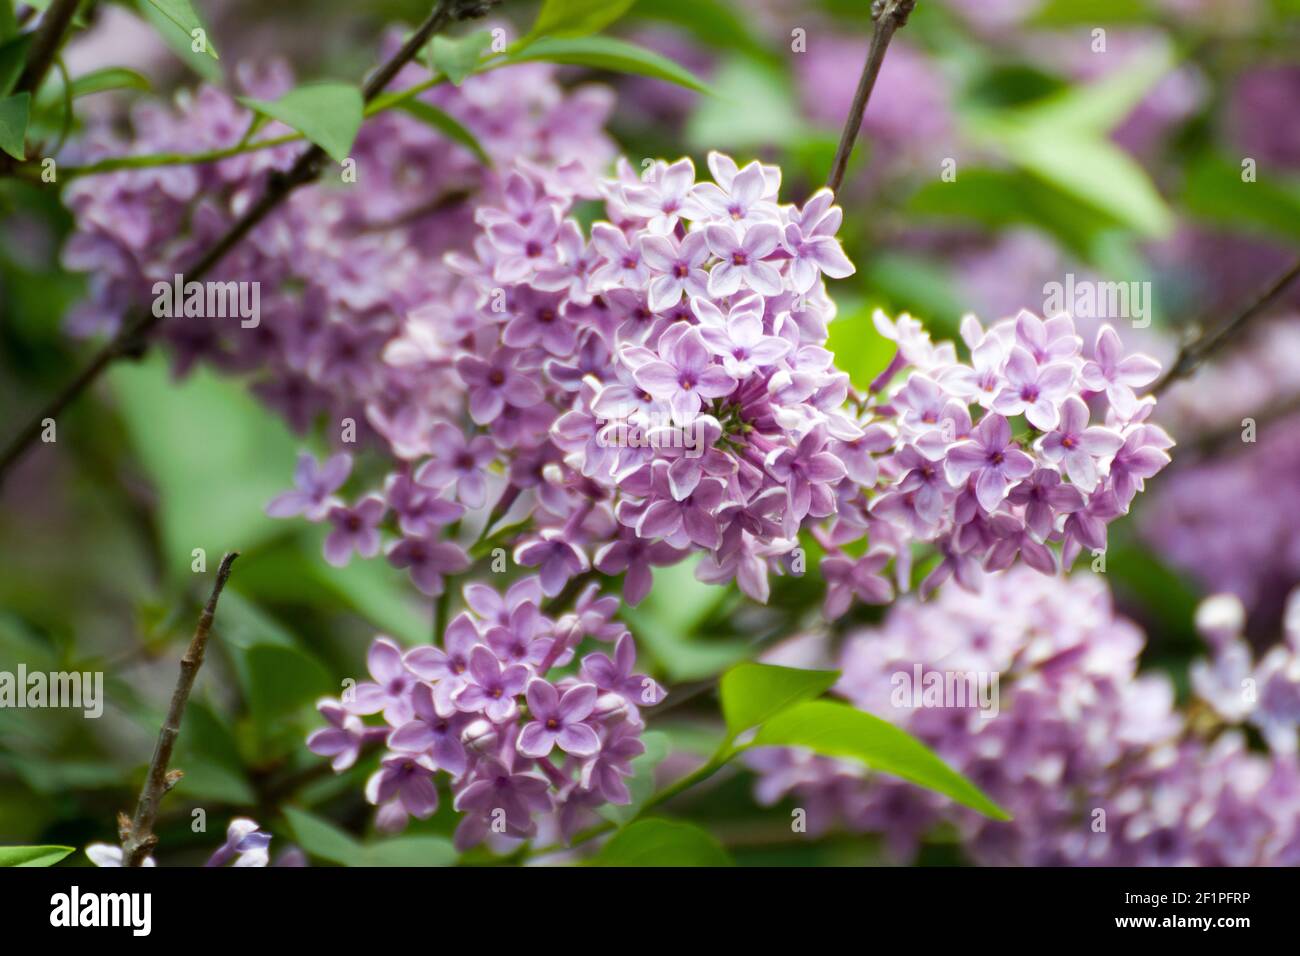 Light purple lilac blossoms. The lilac is a very popular ornamental plant because of its attractive, sweet-smelling flowers. Stock Photo